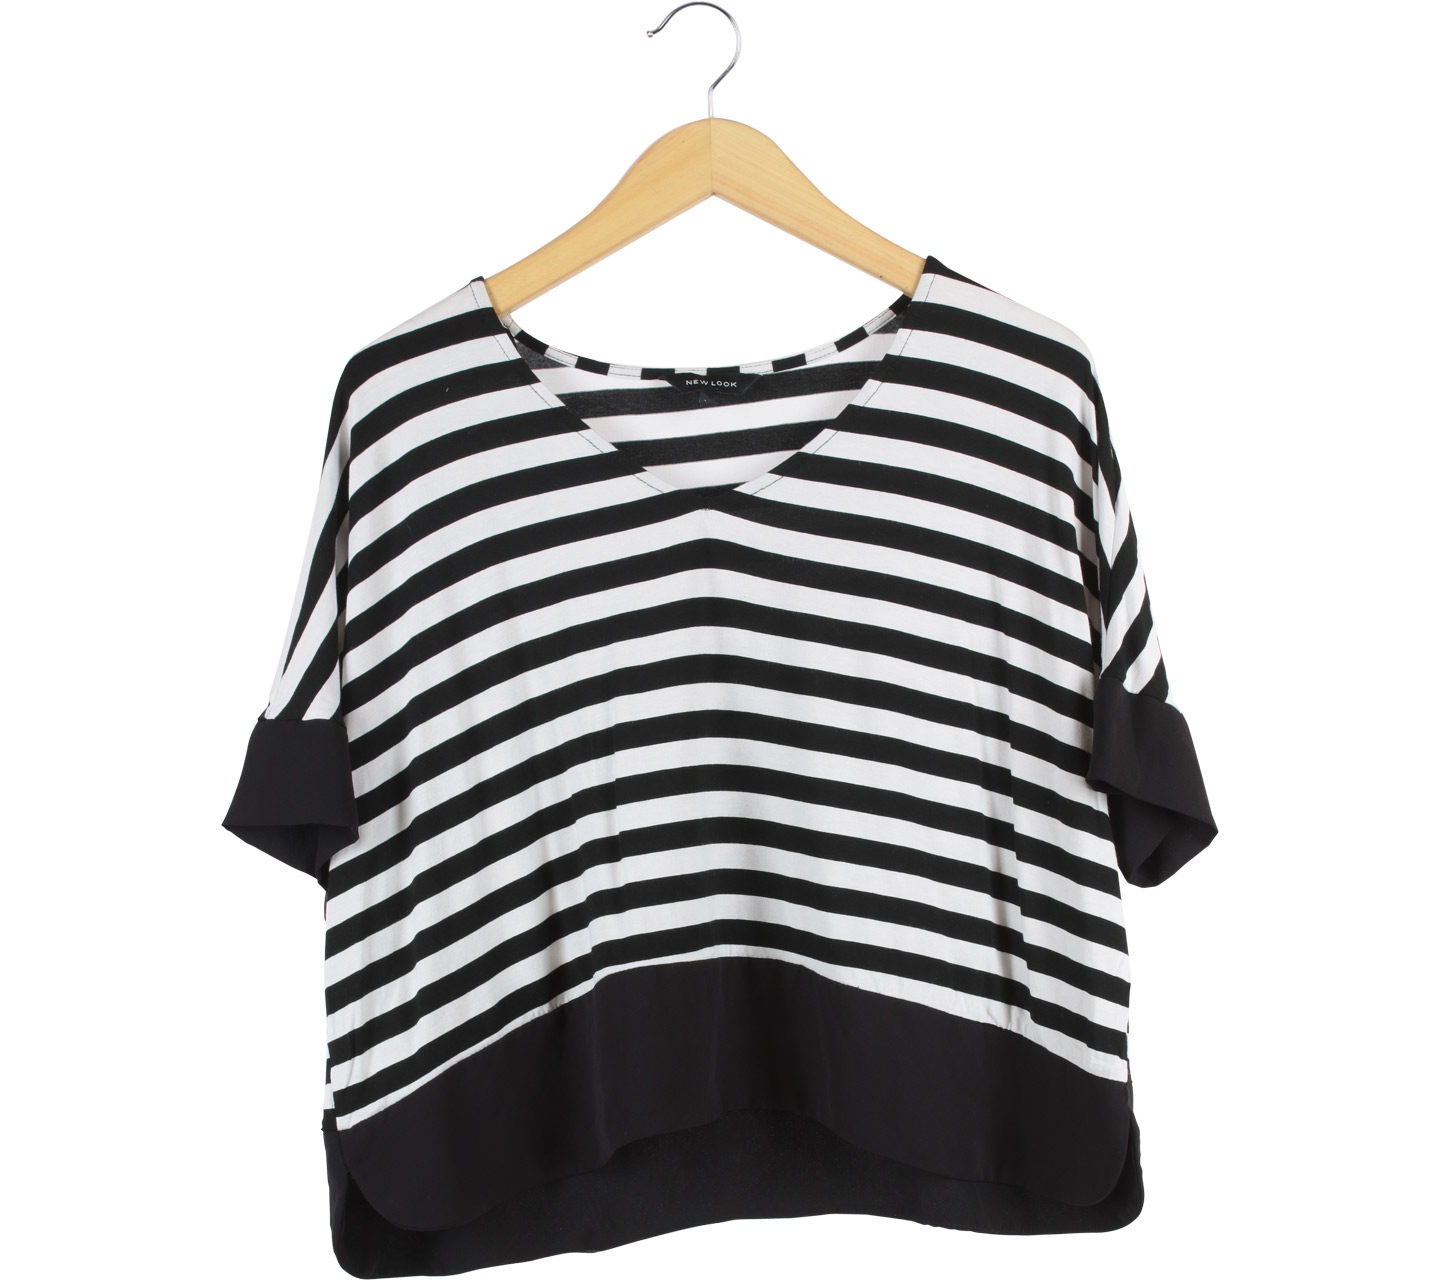 New Look Black And White Striped Blouse